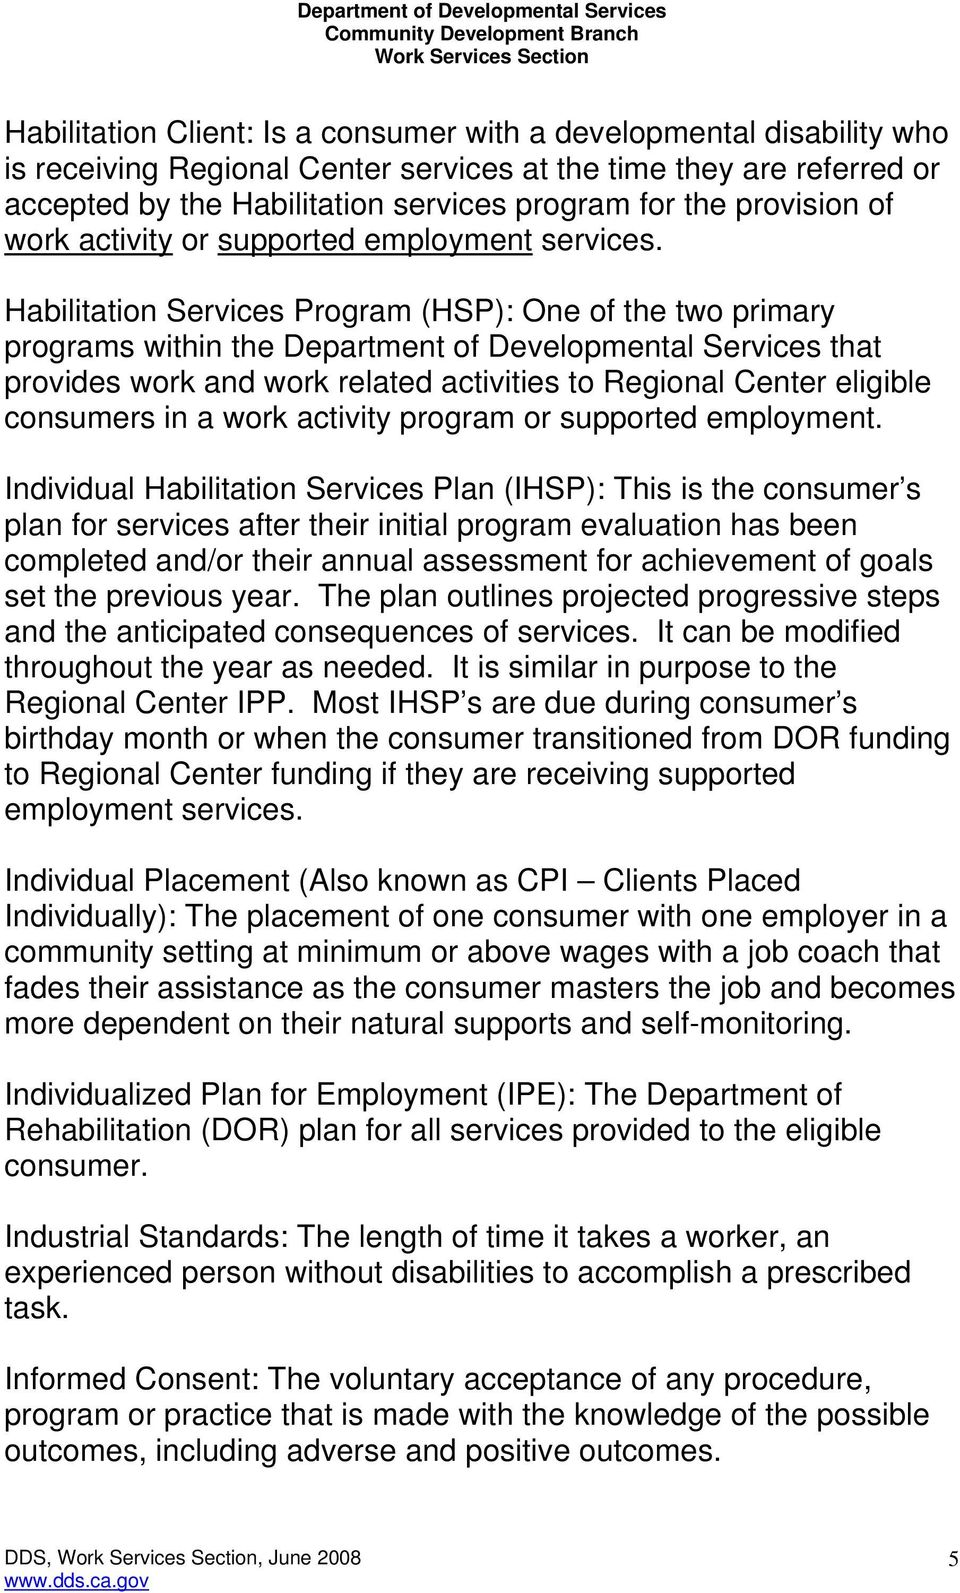 Habilitation Services Program (HSP): One of the two primary programs within the Department of Developmental Services that provides work and work related activities to Regional Center eligible